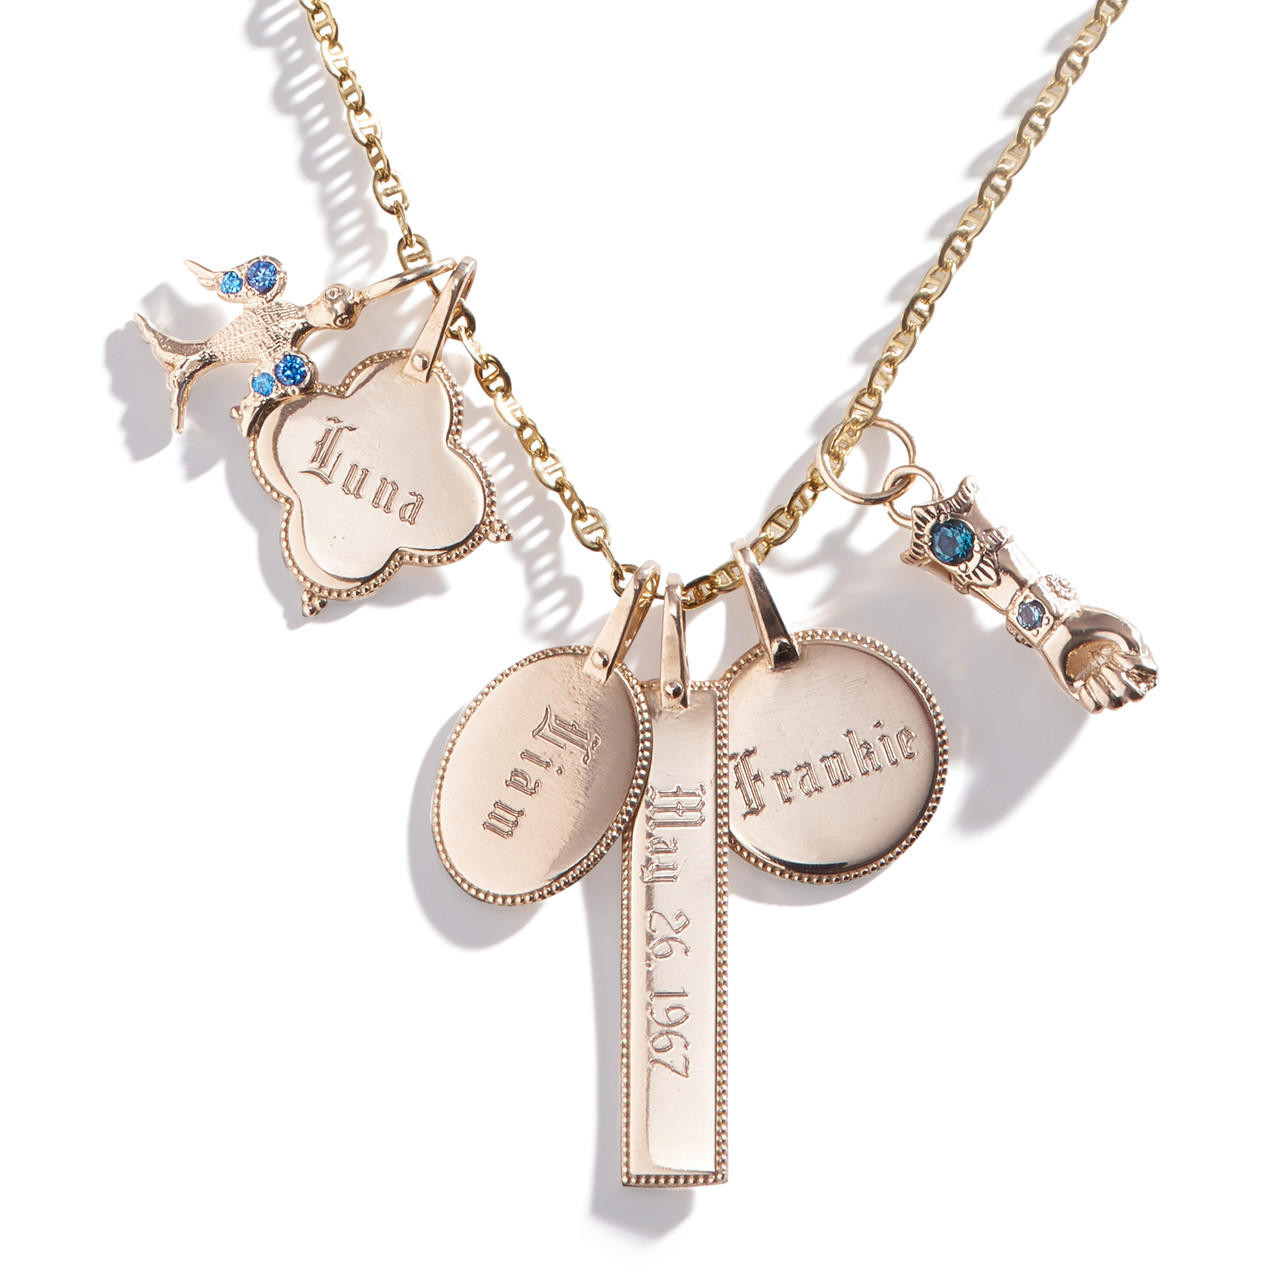 Lucy Chain Necklace with Engravable Tag